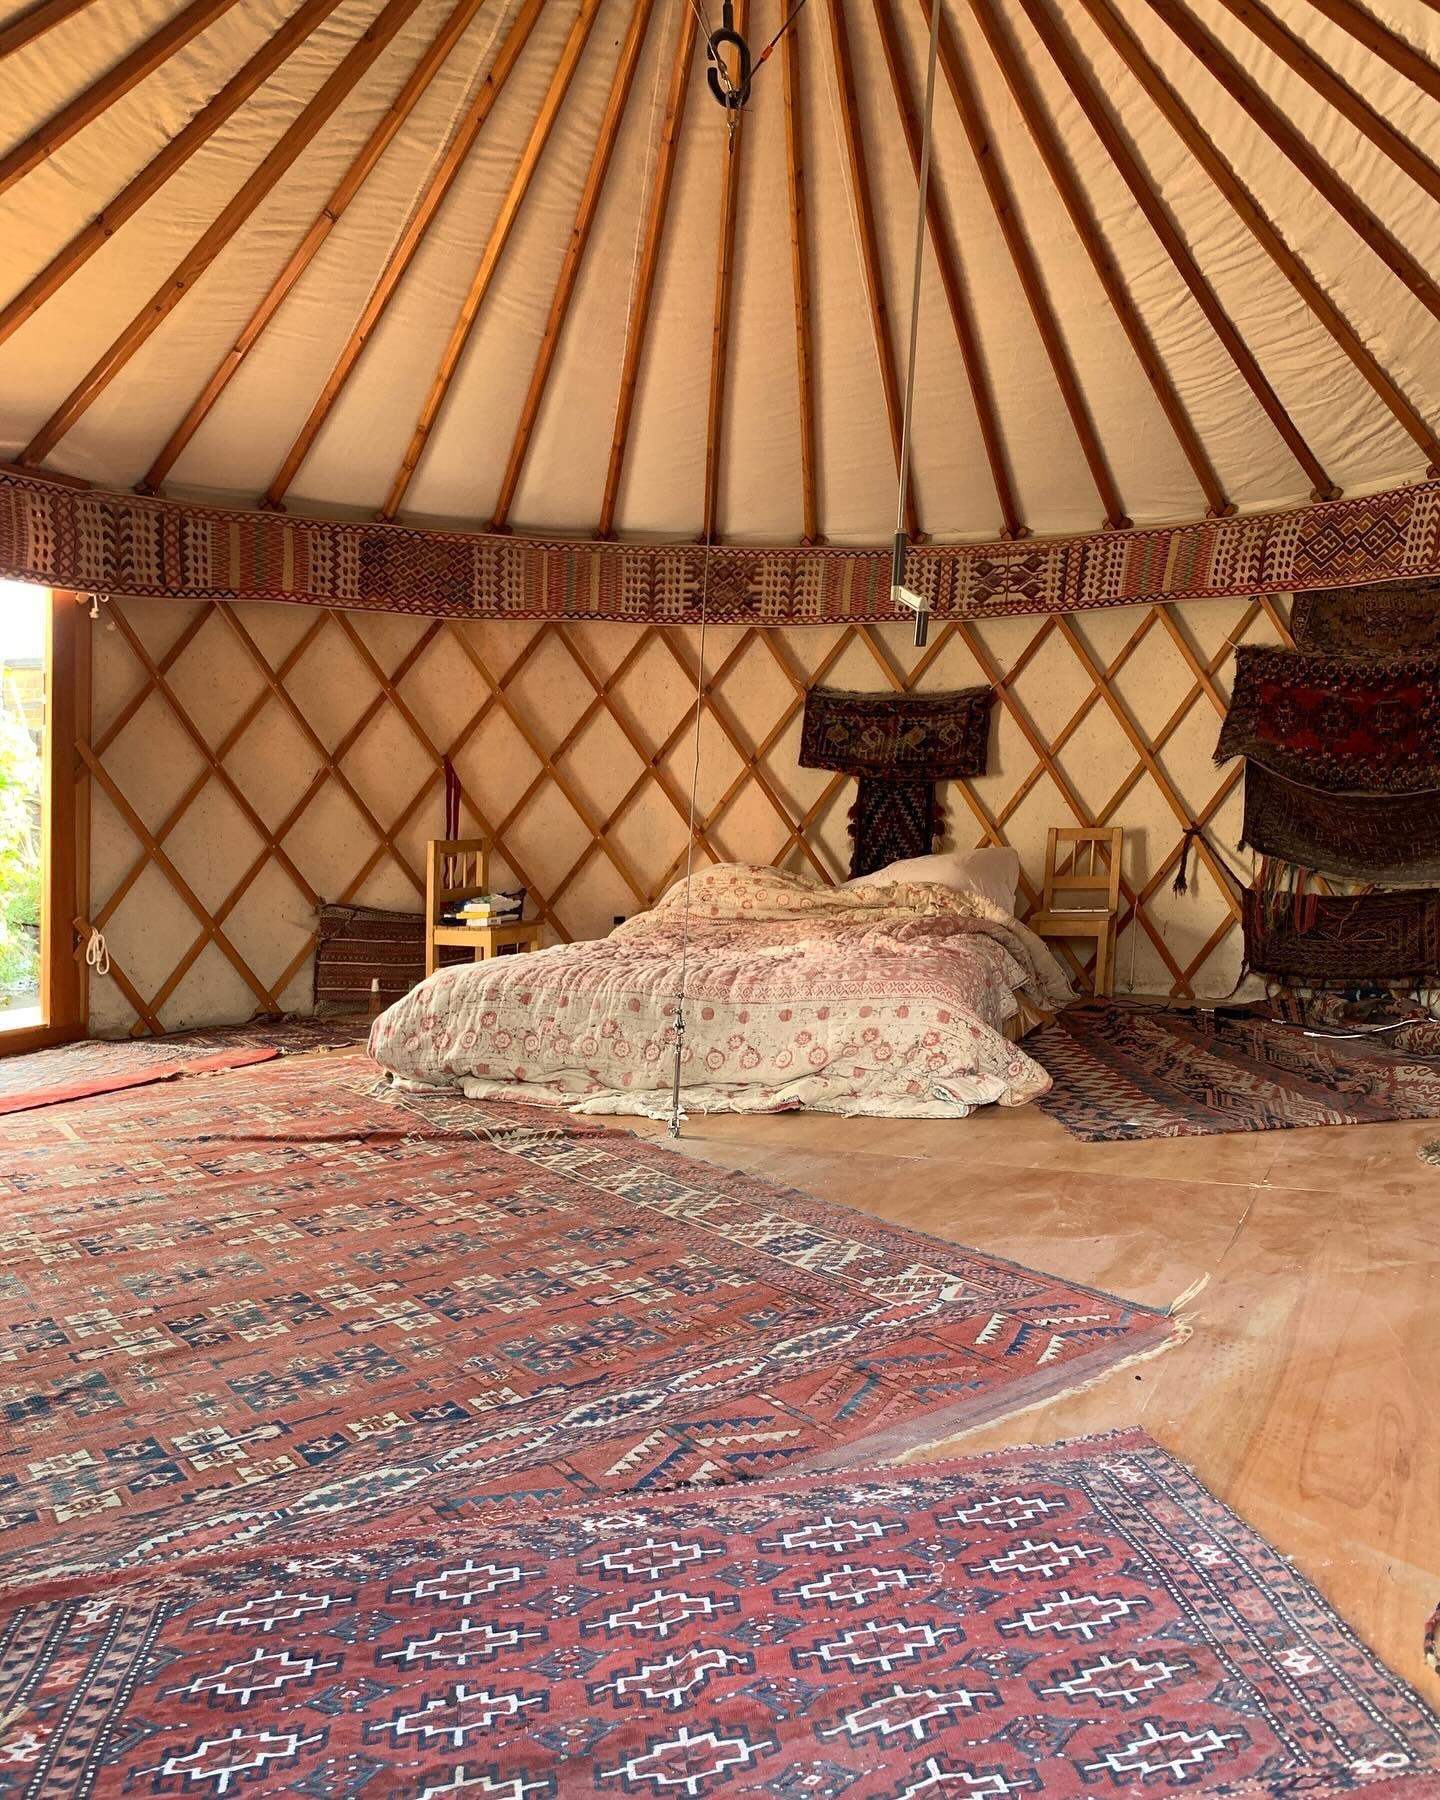 🛖🌙&nbsp; My friend Charbel has hands down the coolest sleeping arrangement in all of London 🌟&nbsp; This Central Asian yurt installed on his rooftop not only serves as his bedroom all year round - it also houses his gorgeous Central Asian rug coll